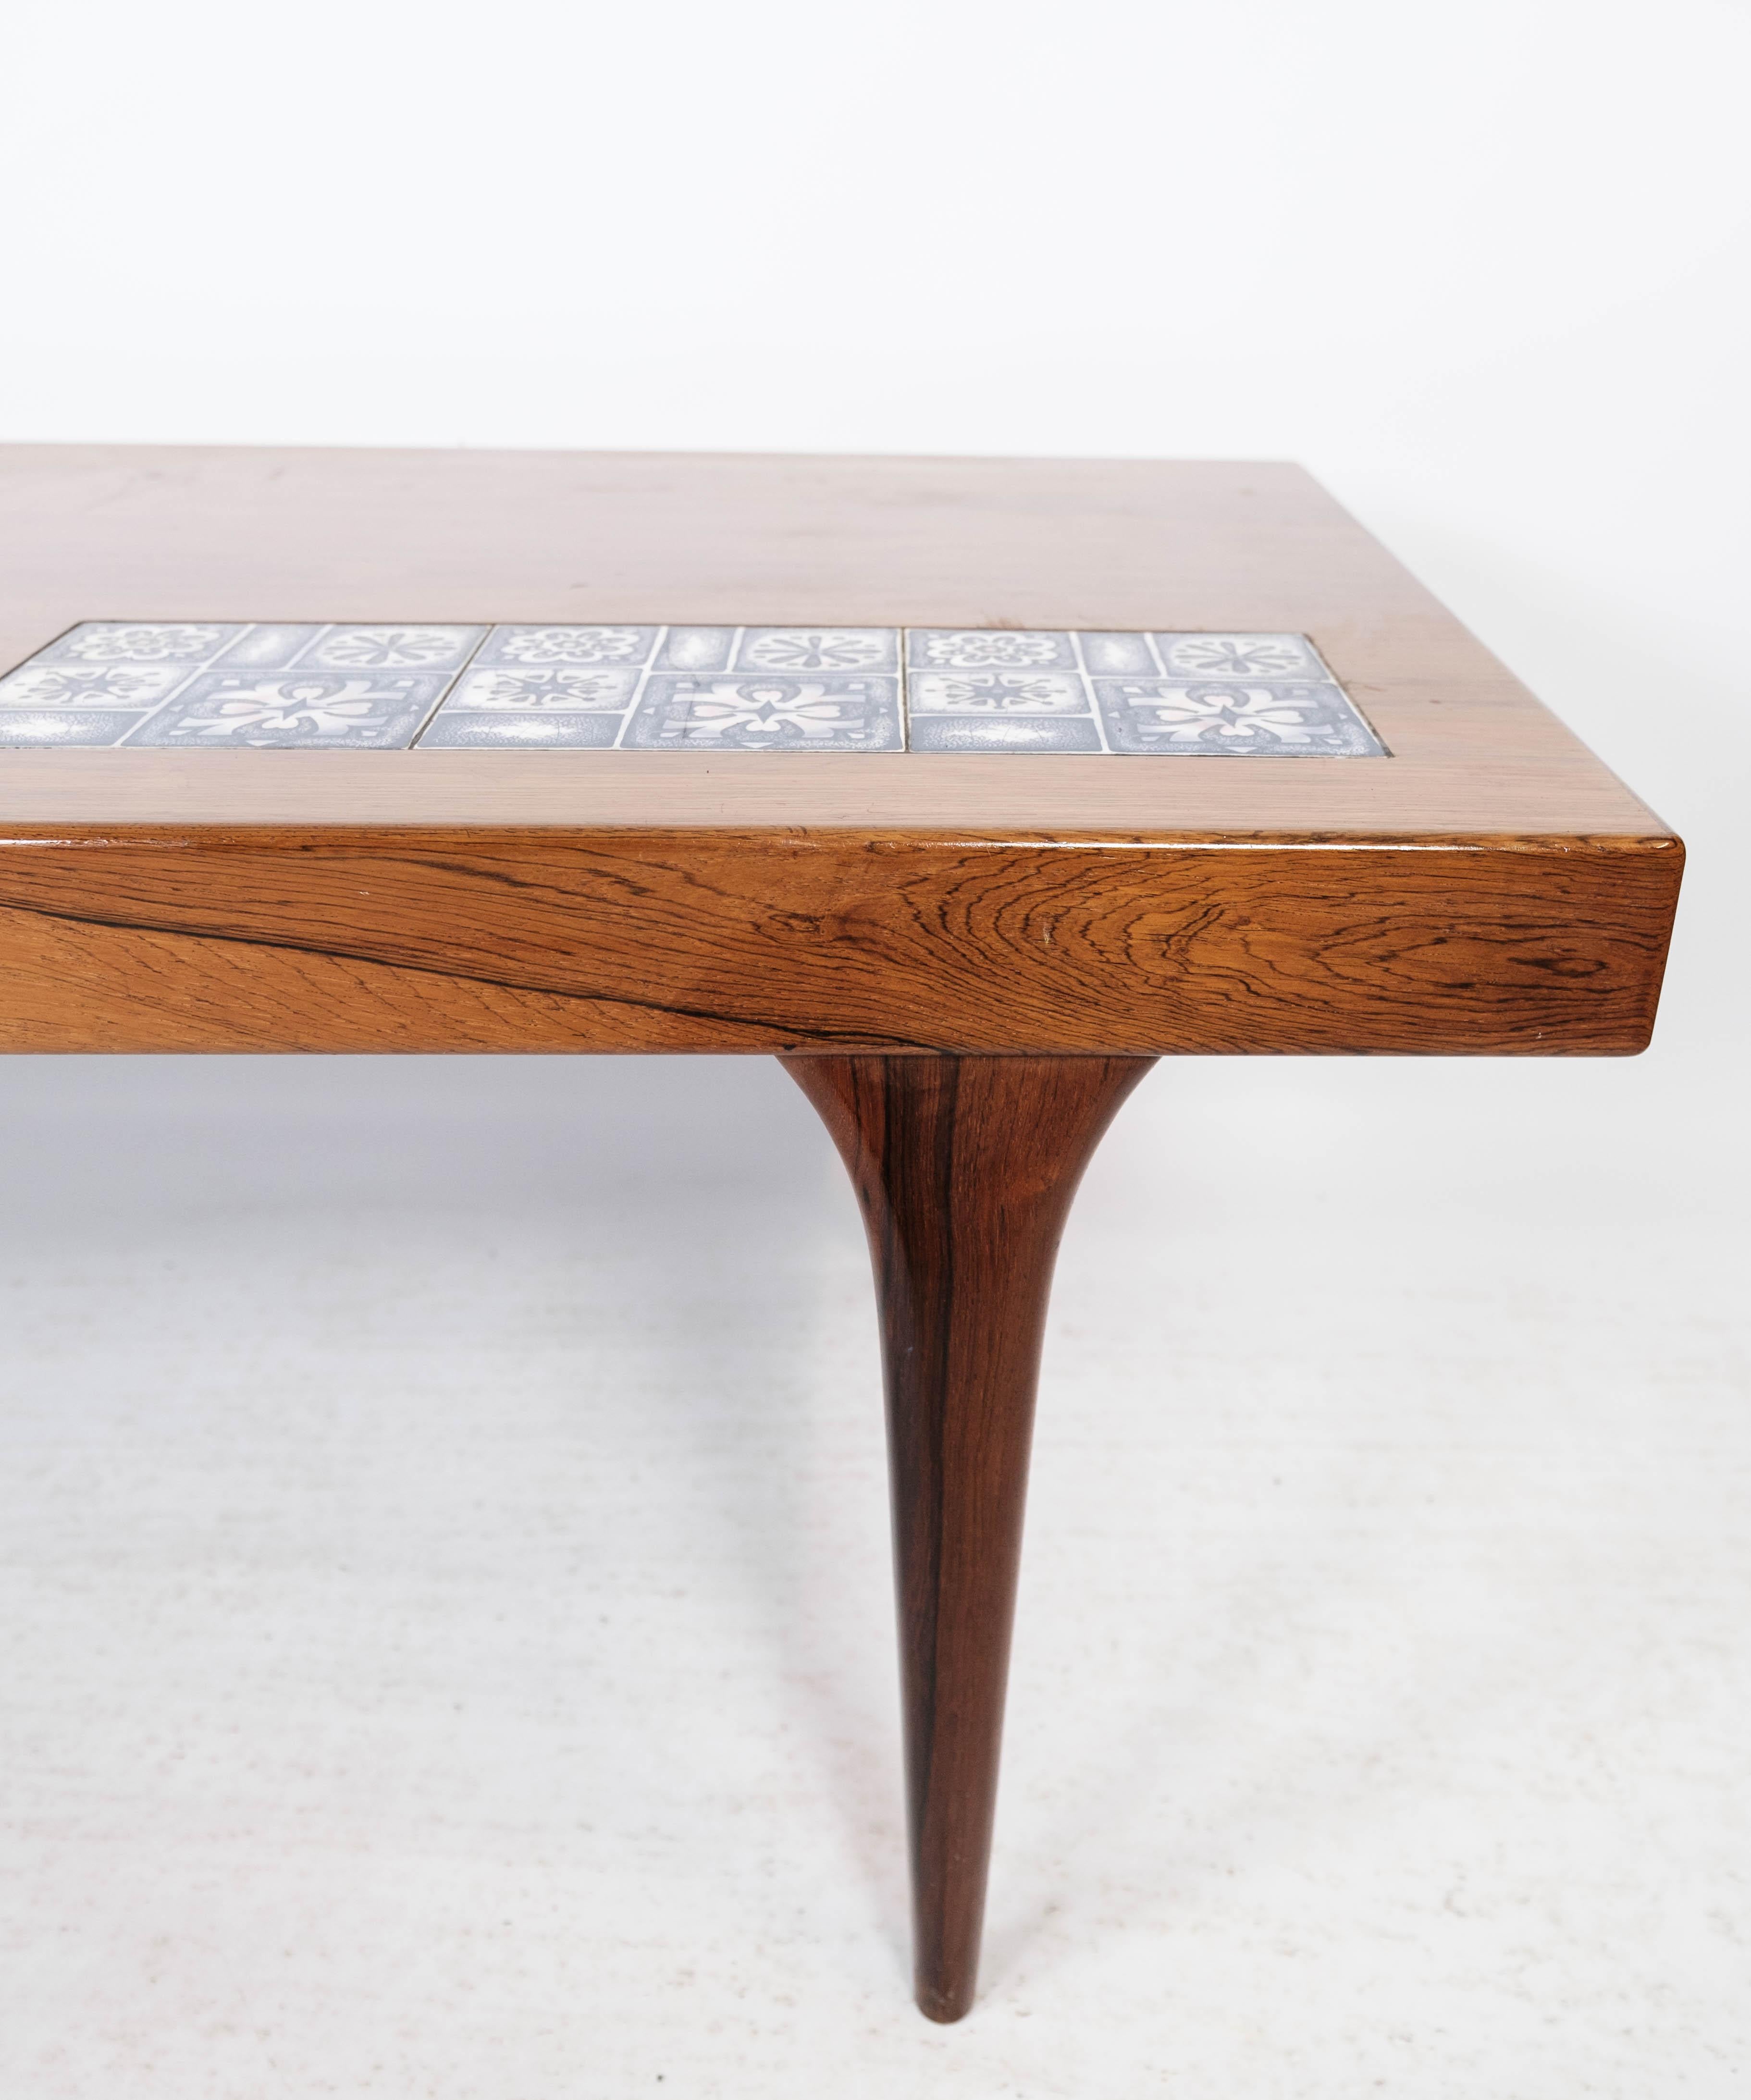 Mid-20th Century Coffee Table Made In Rosewood With Blue Tiles By Johannes Andersen From 1960s For Sale